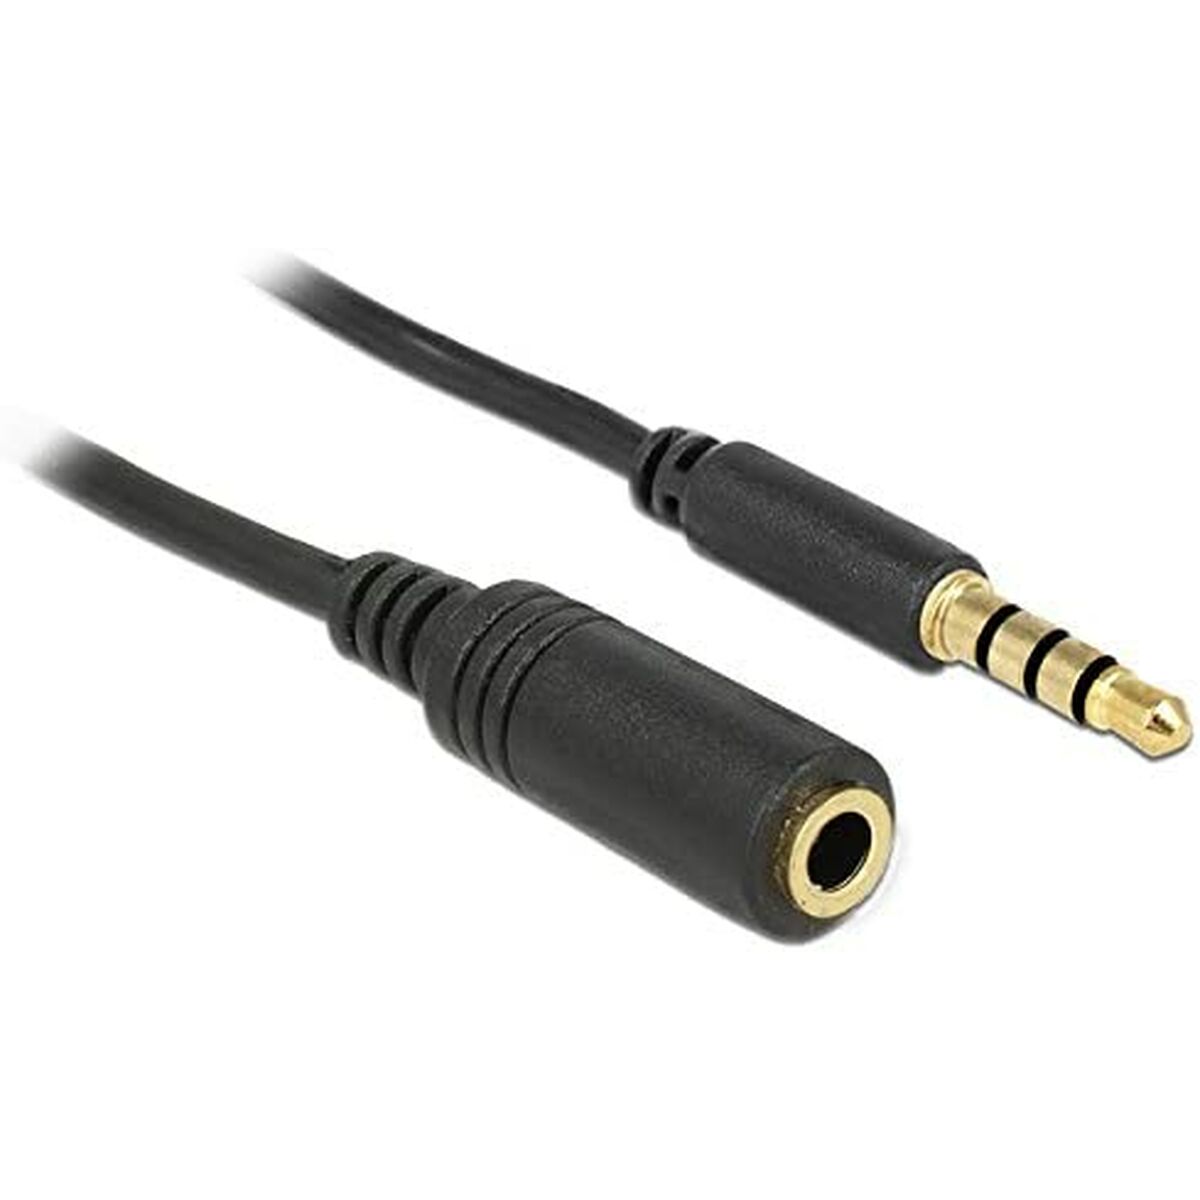 Audio Jack Cable (3.5mm) DELOCK 84667 (Refurbished A+)